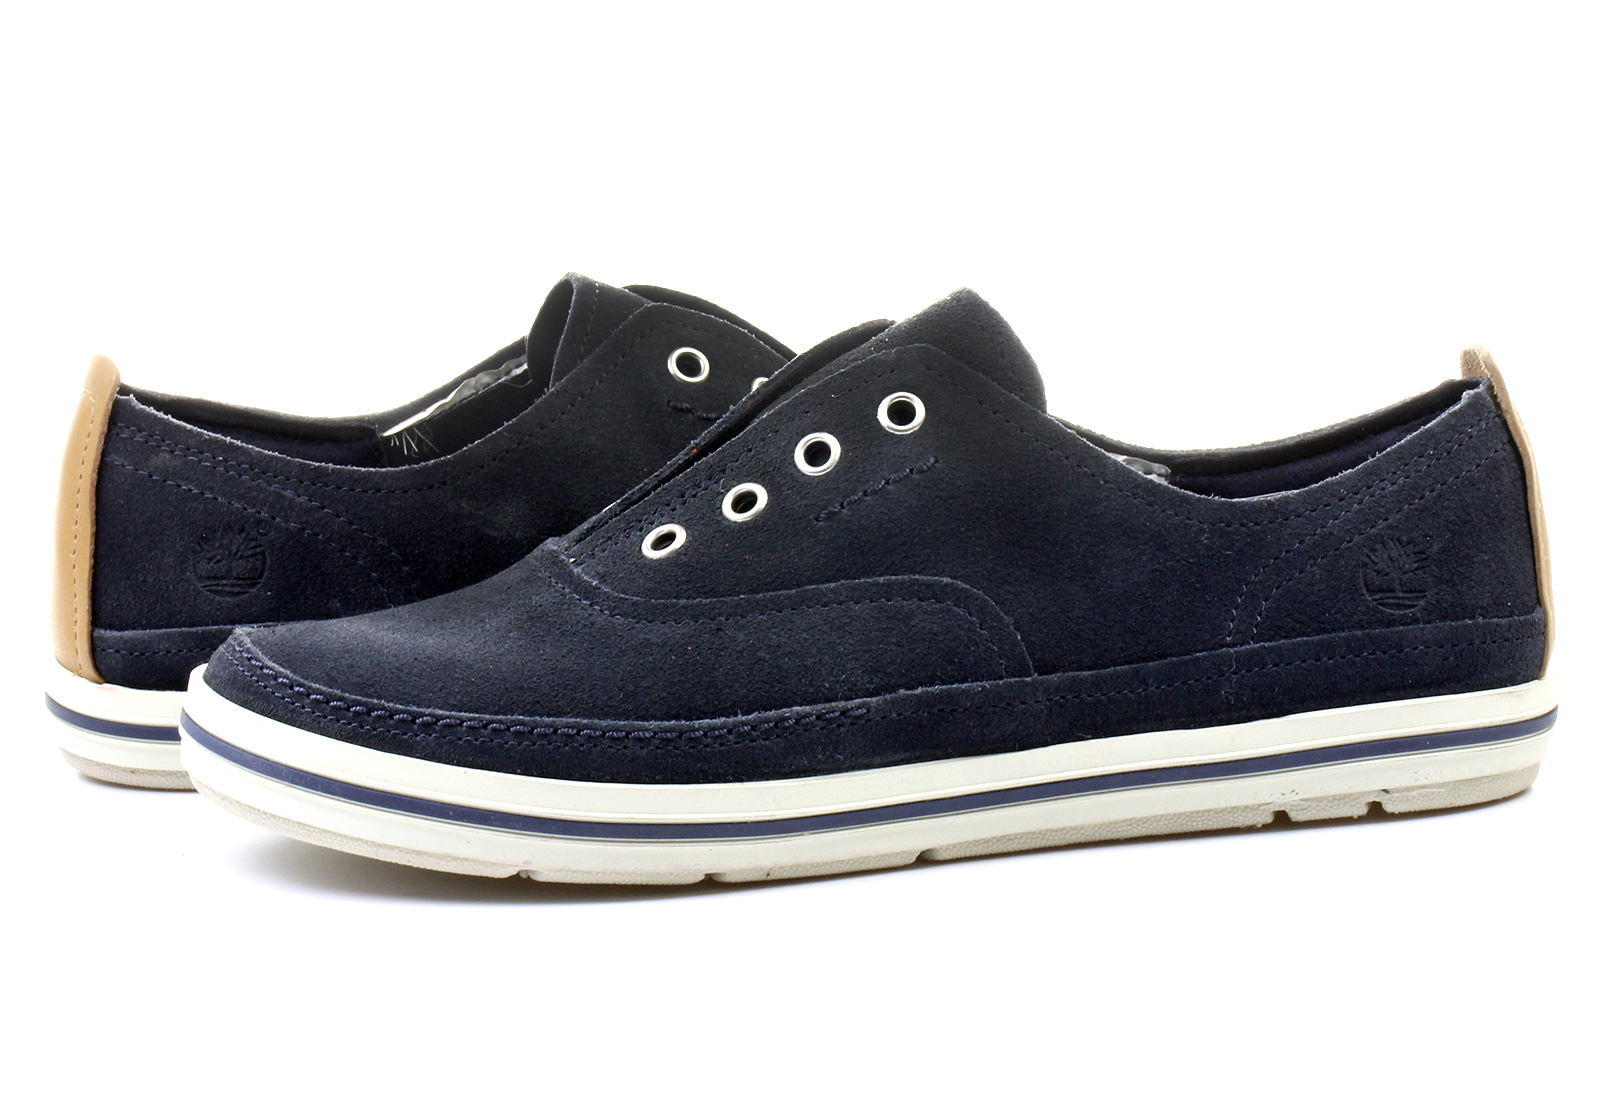 Timberland Shoes - Cascobay Slip On - 8843R-nvy - Online shop for ...